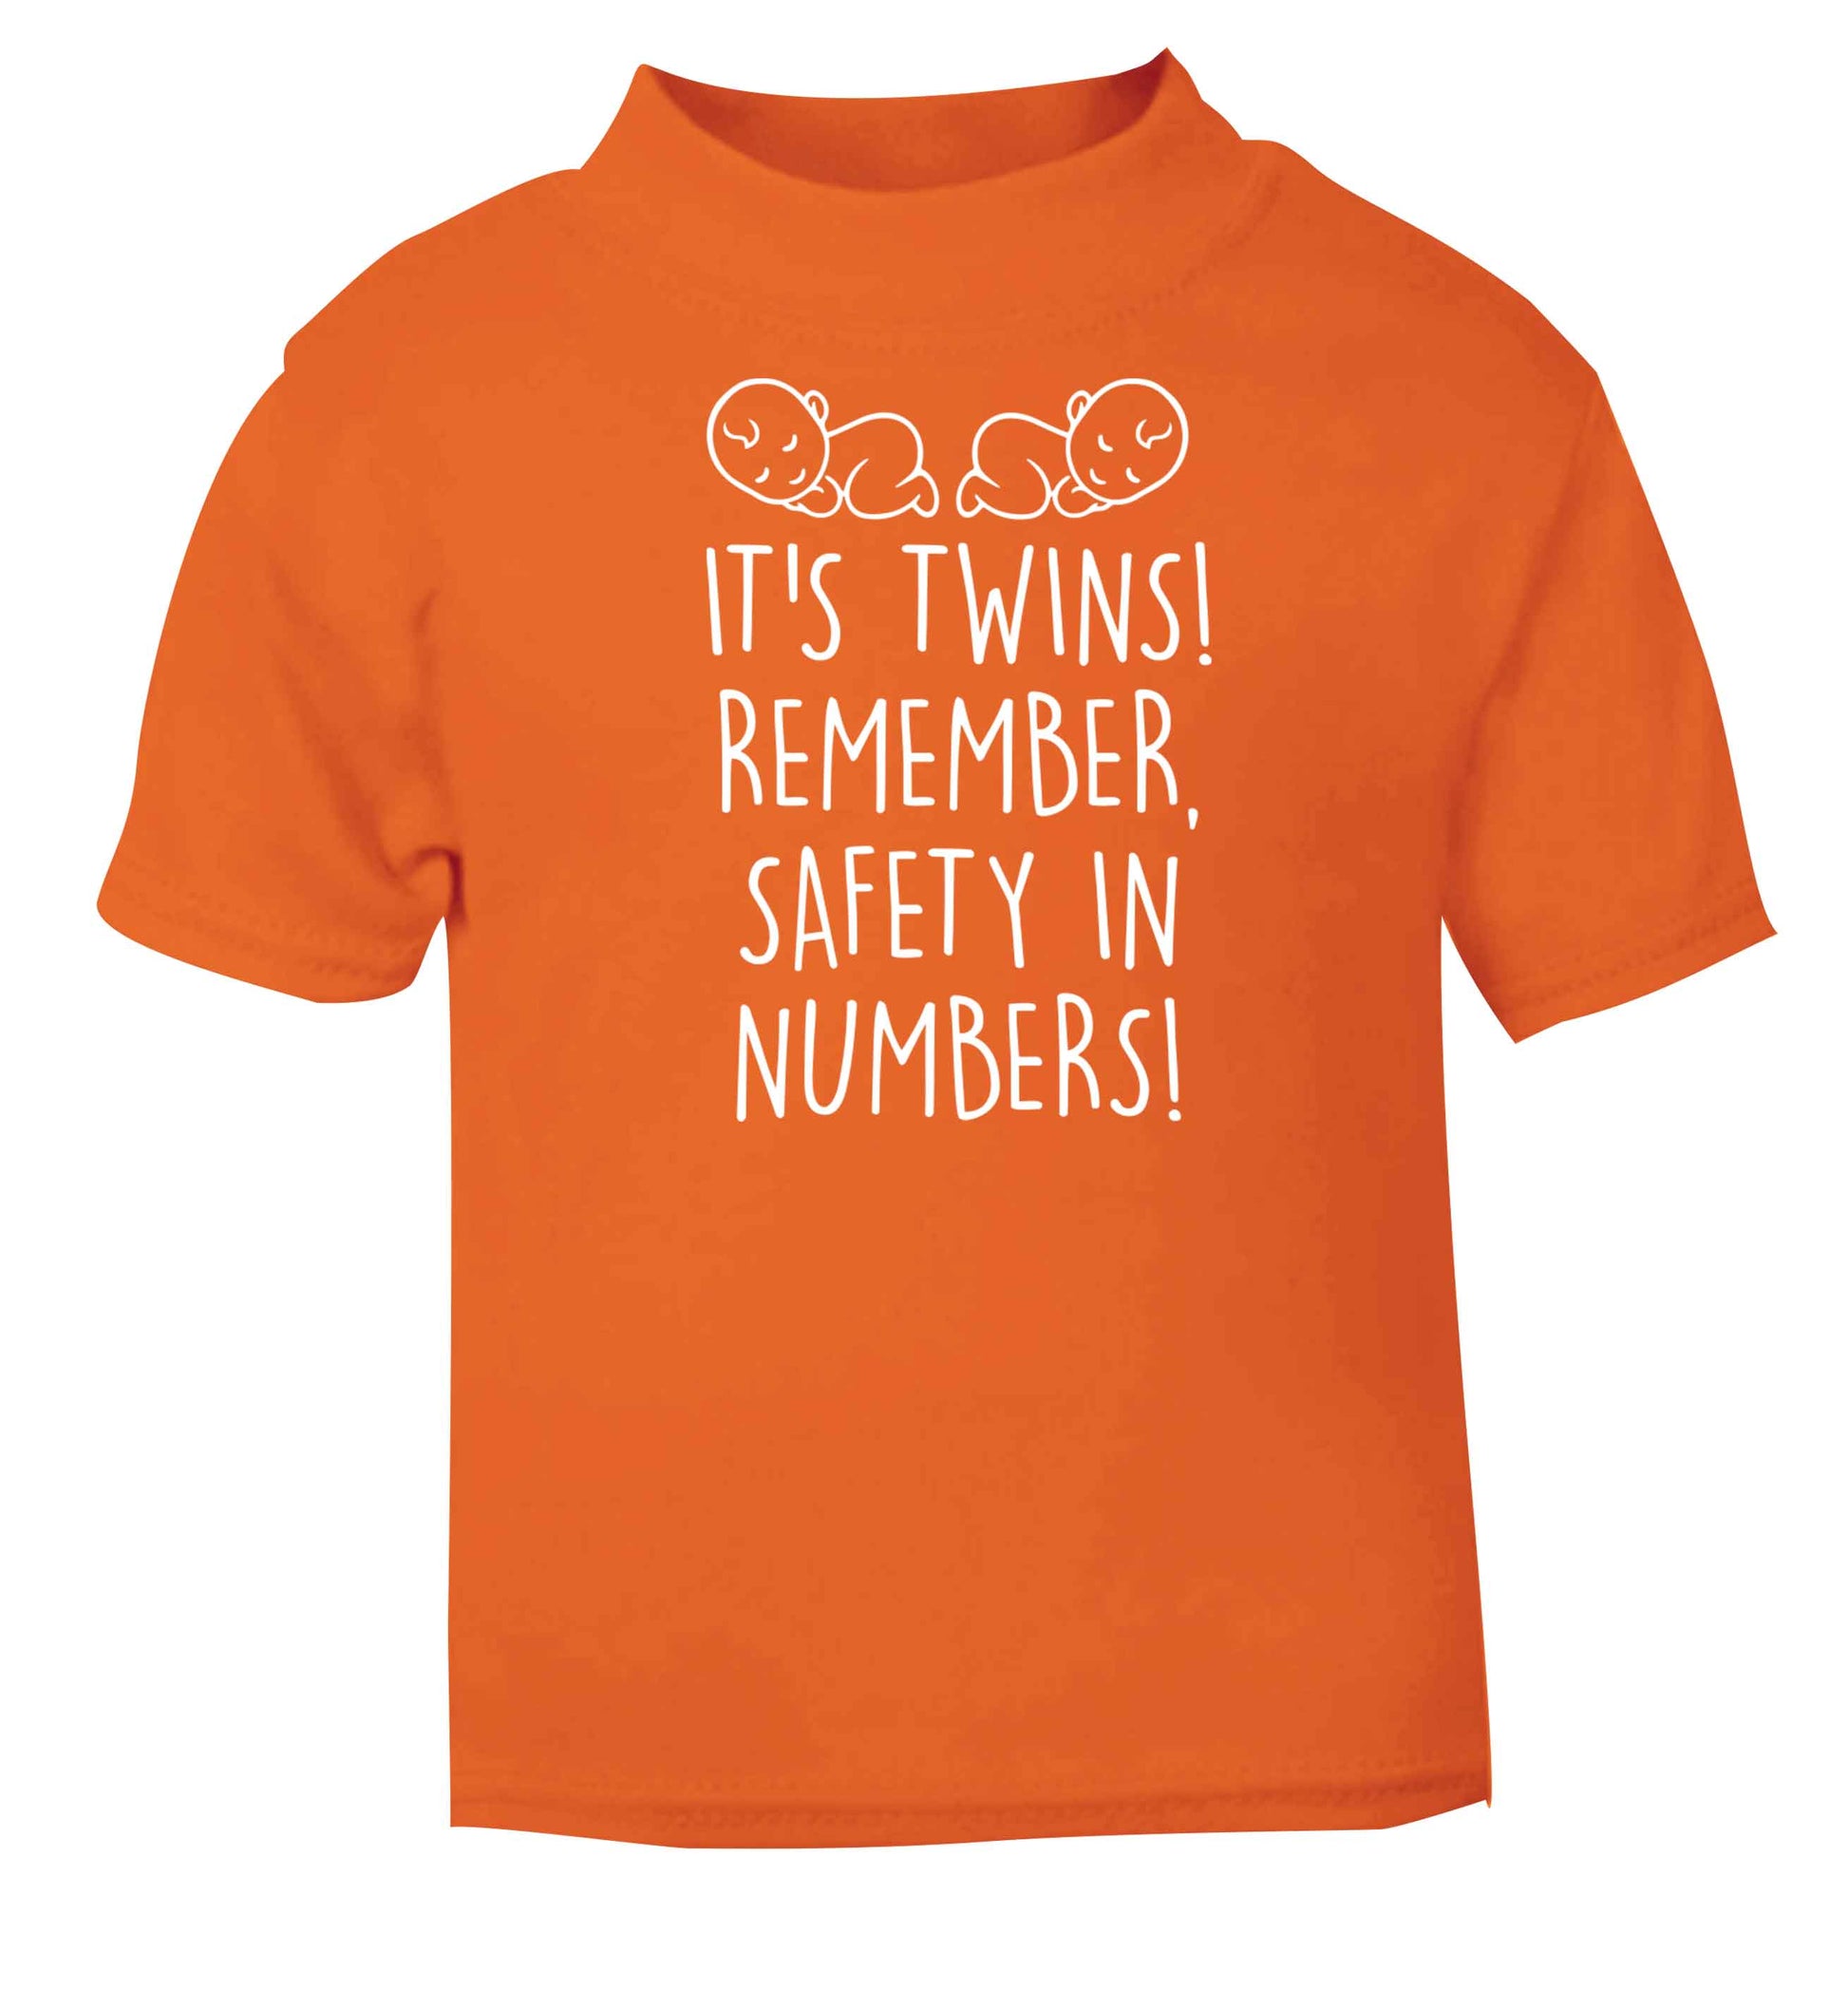 It's twins! Remember safety in numbers! orange baby toddler Tshirt 2 Years